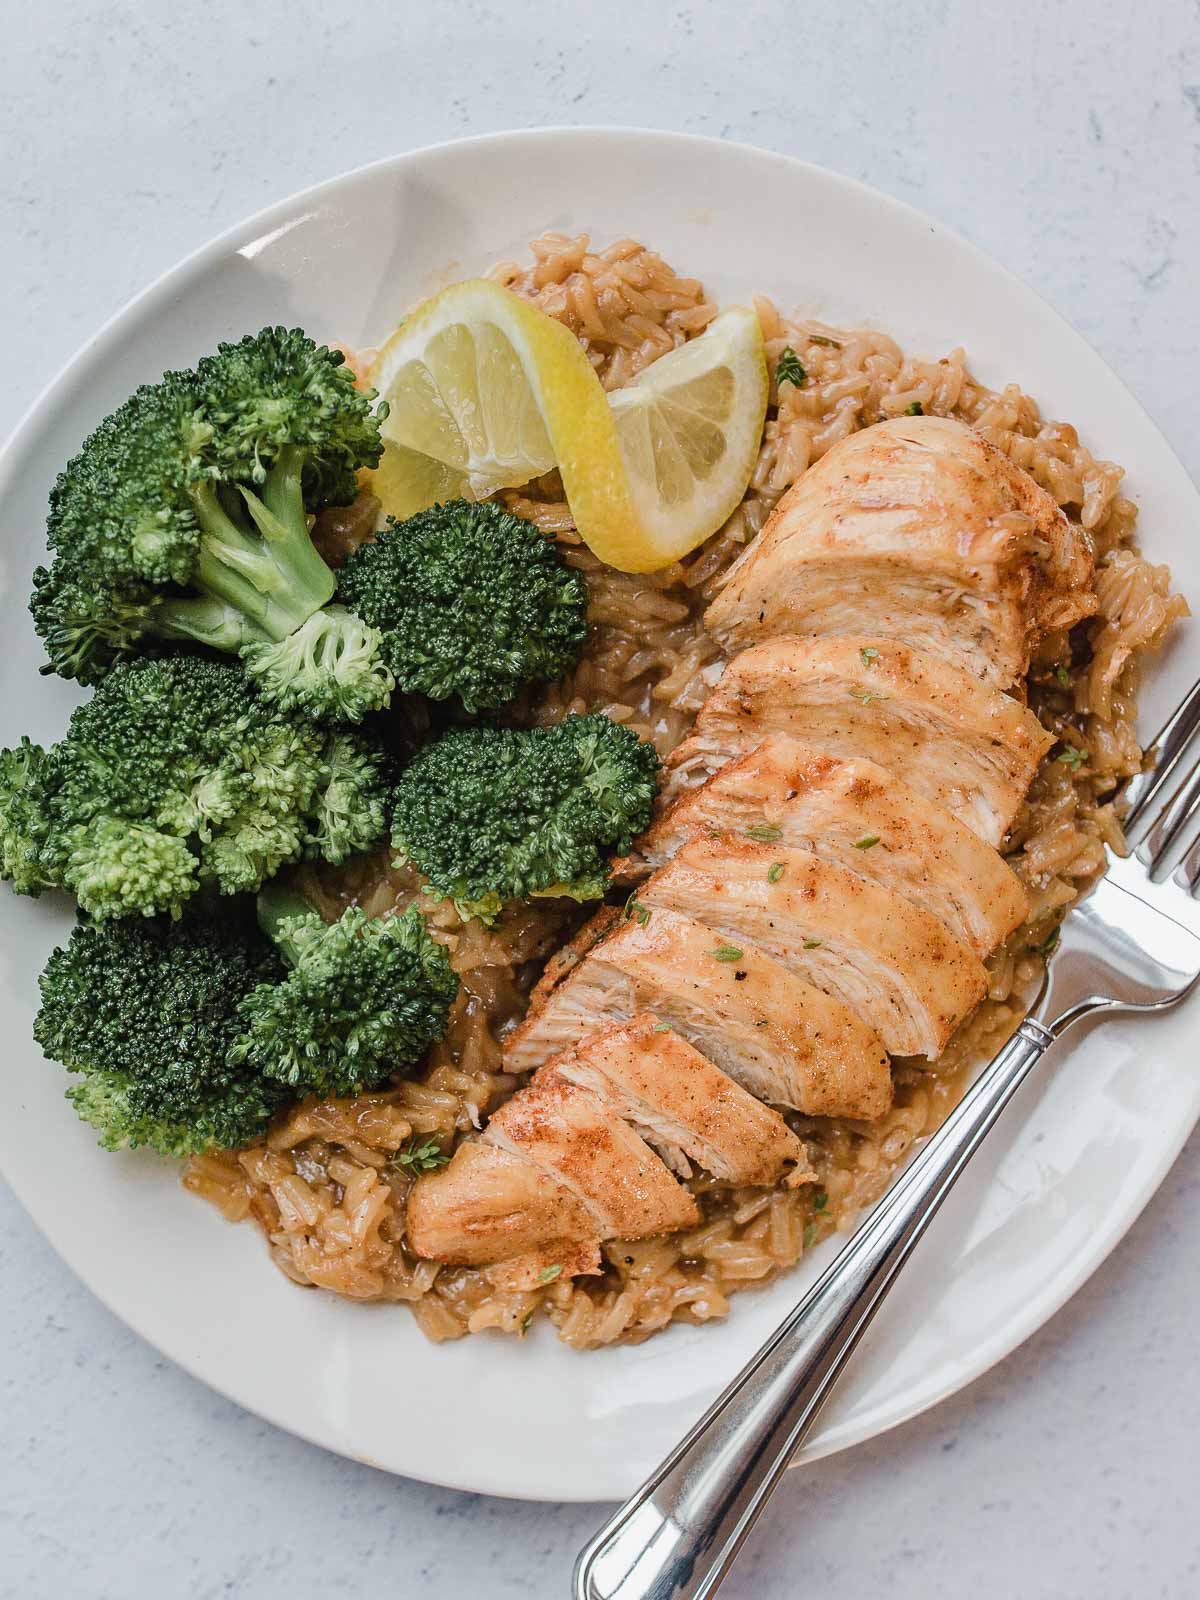 IP Lemon Herb Chicken and Rice on a plate with broccoli.